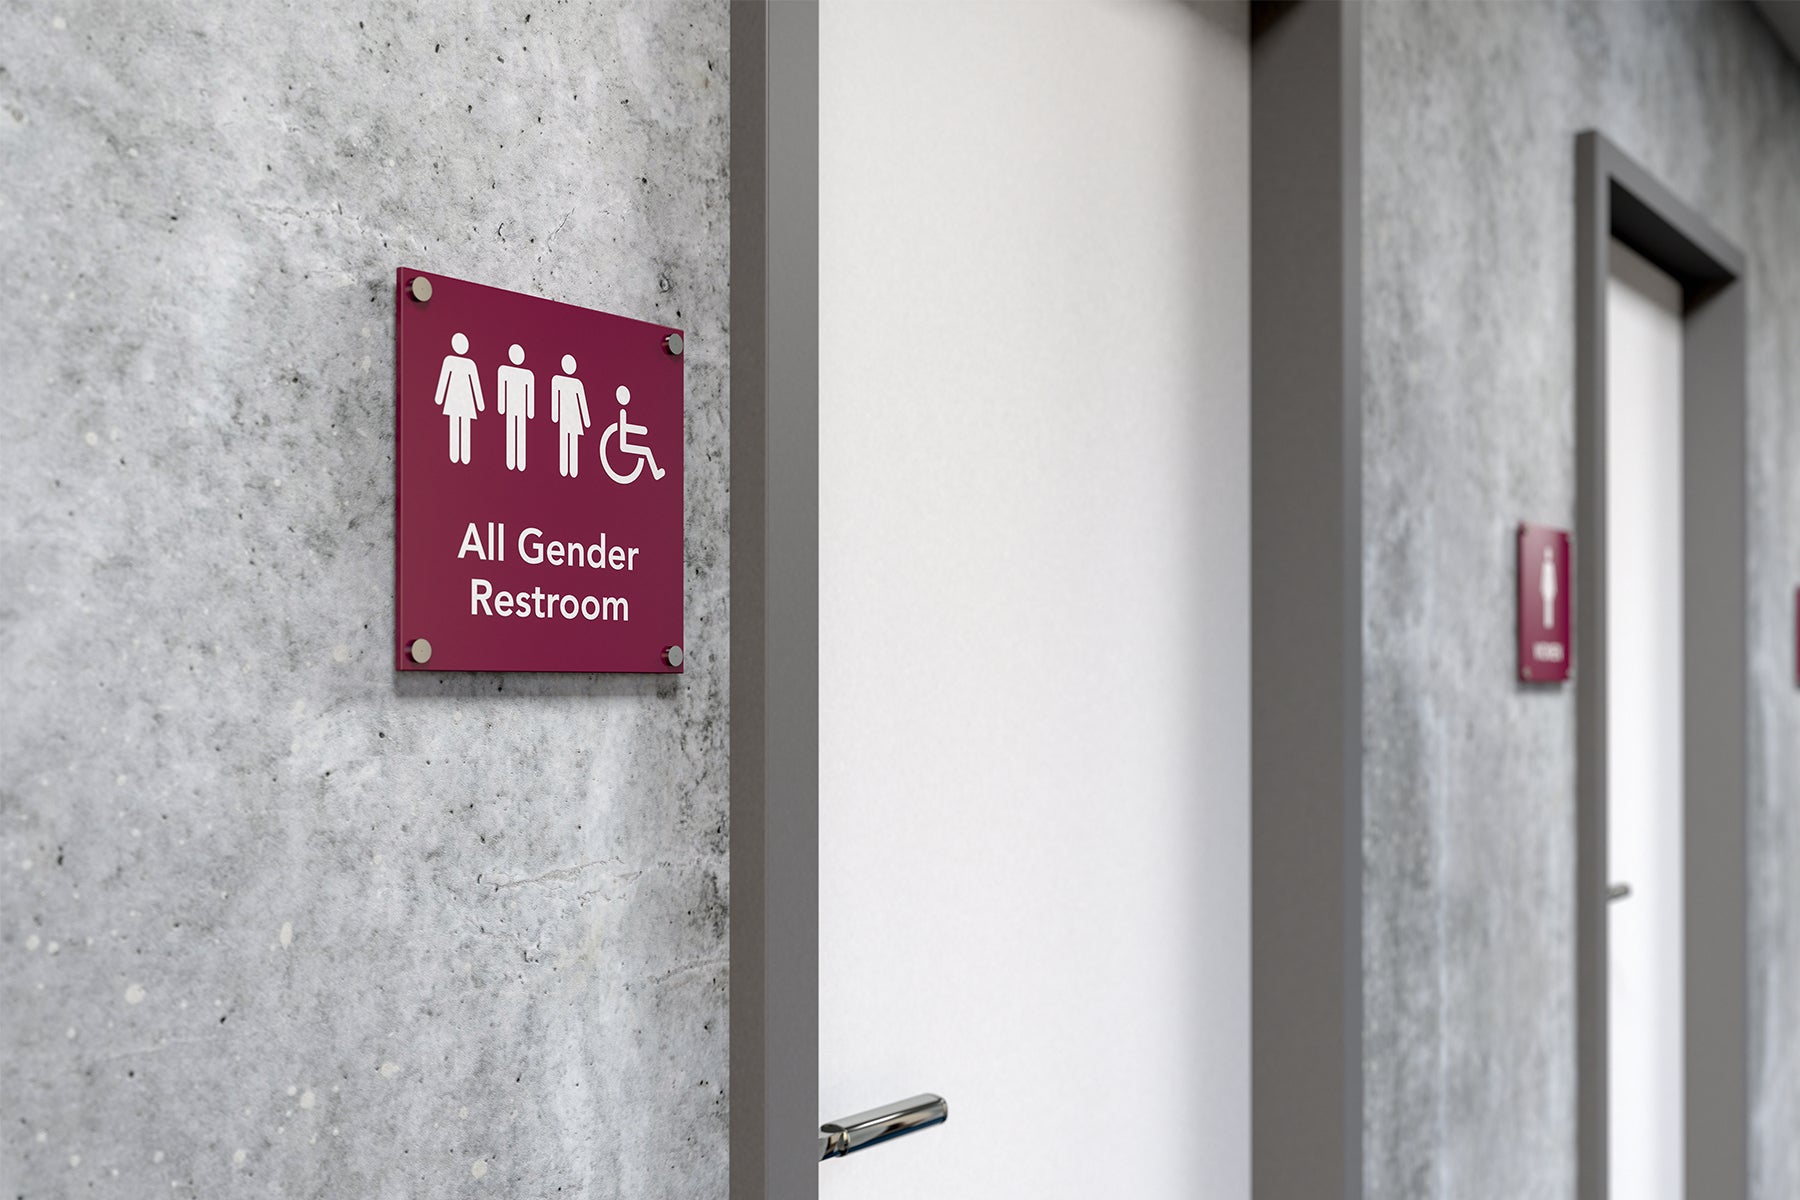 Image of a toilet door with a sign reading 'All Gender Restroom'